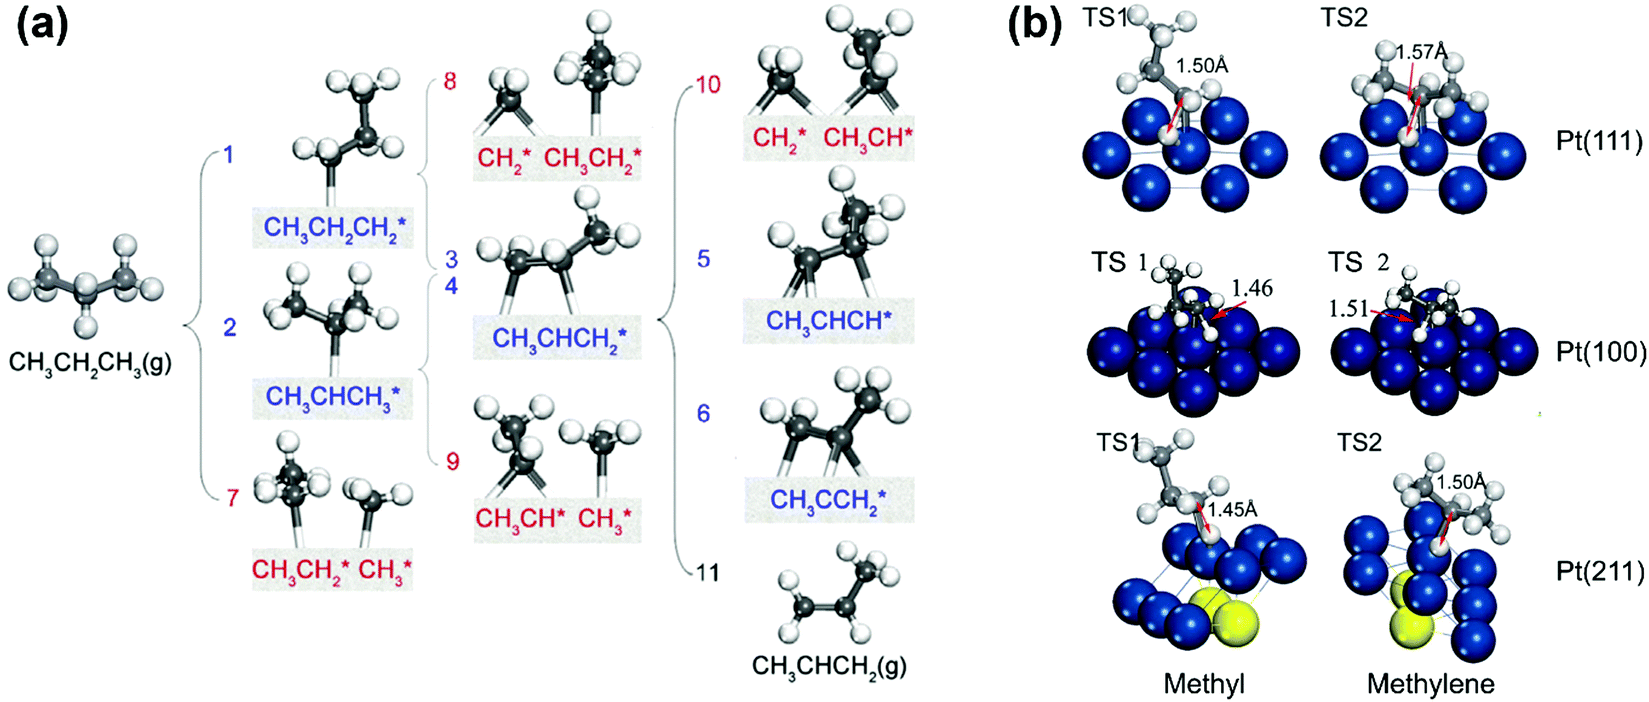 C H Bond Activation In Light Alkanes A Theoretical Perspective Chemical Society Reviews Rsc Publishing Doi 10 1039 D0csa